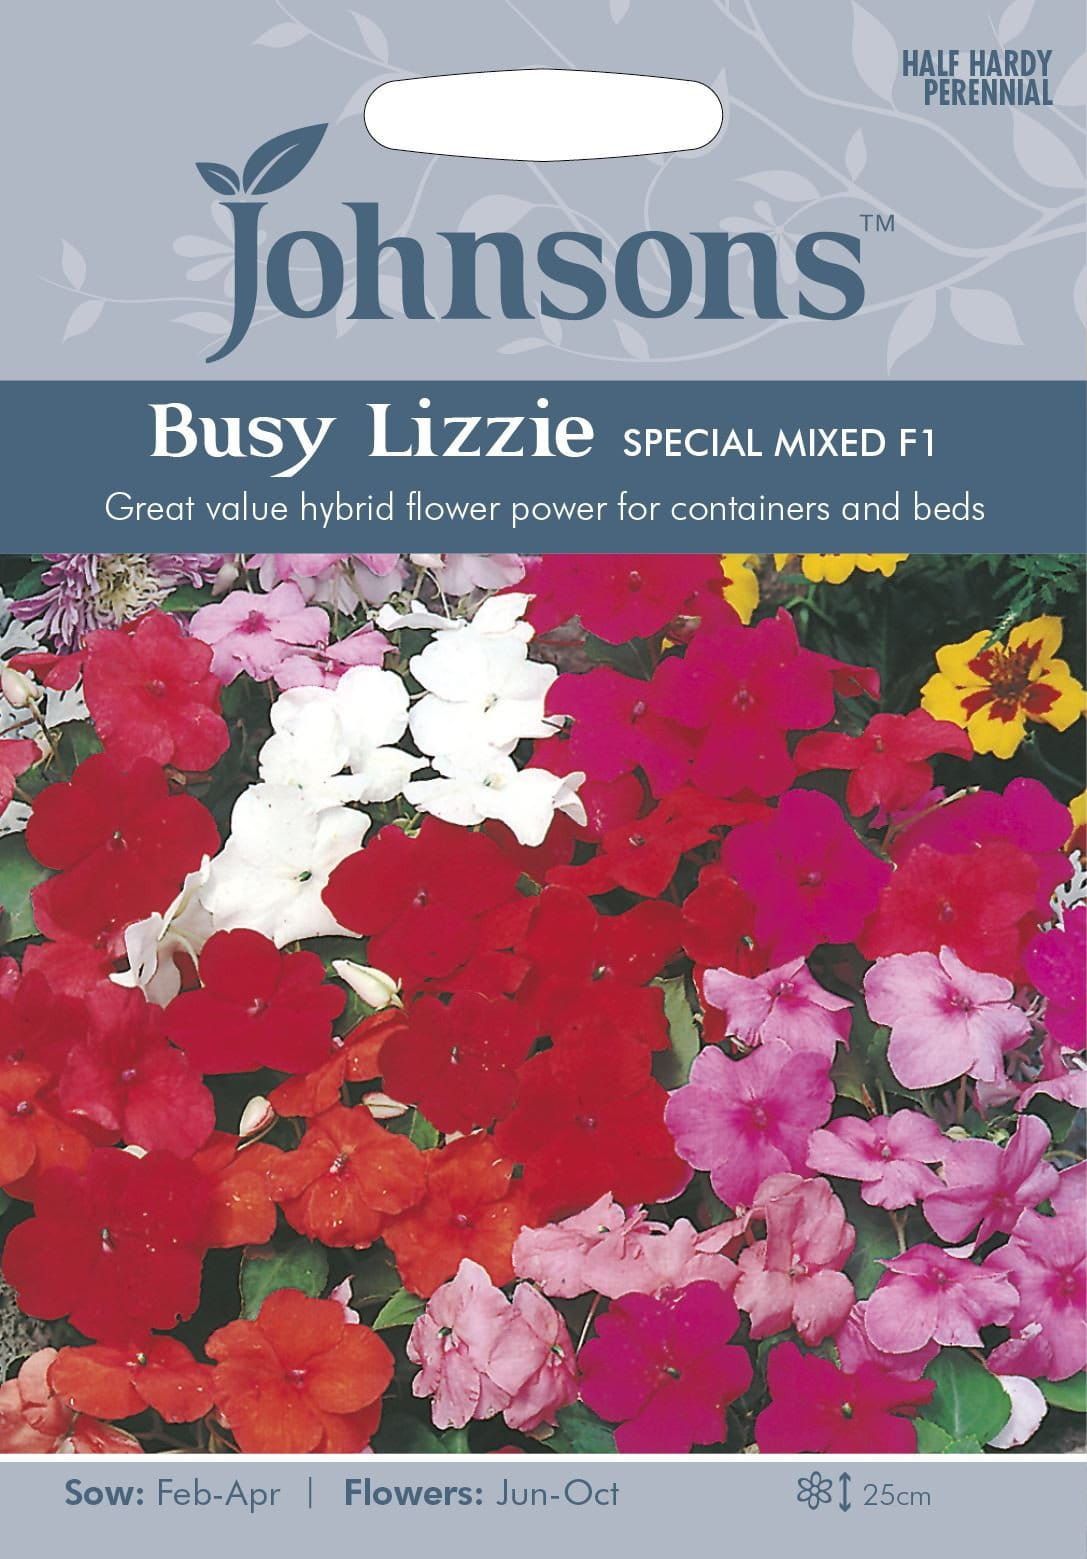 Johnsons Busy Lizzie Special Mixed F1 45 Seeds